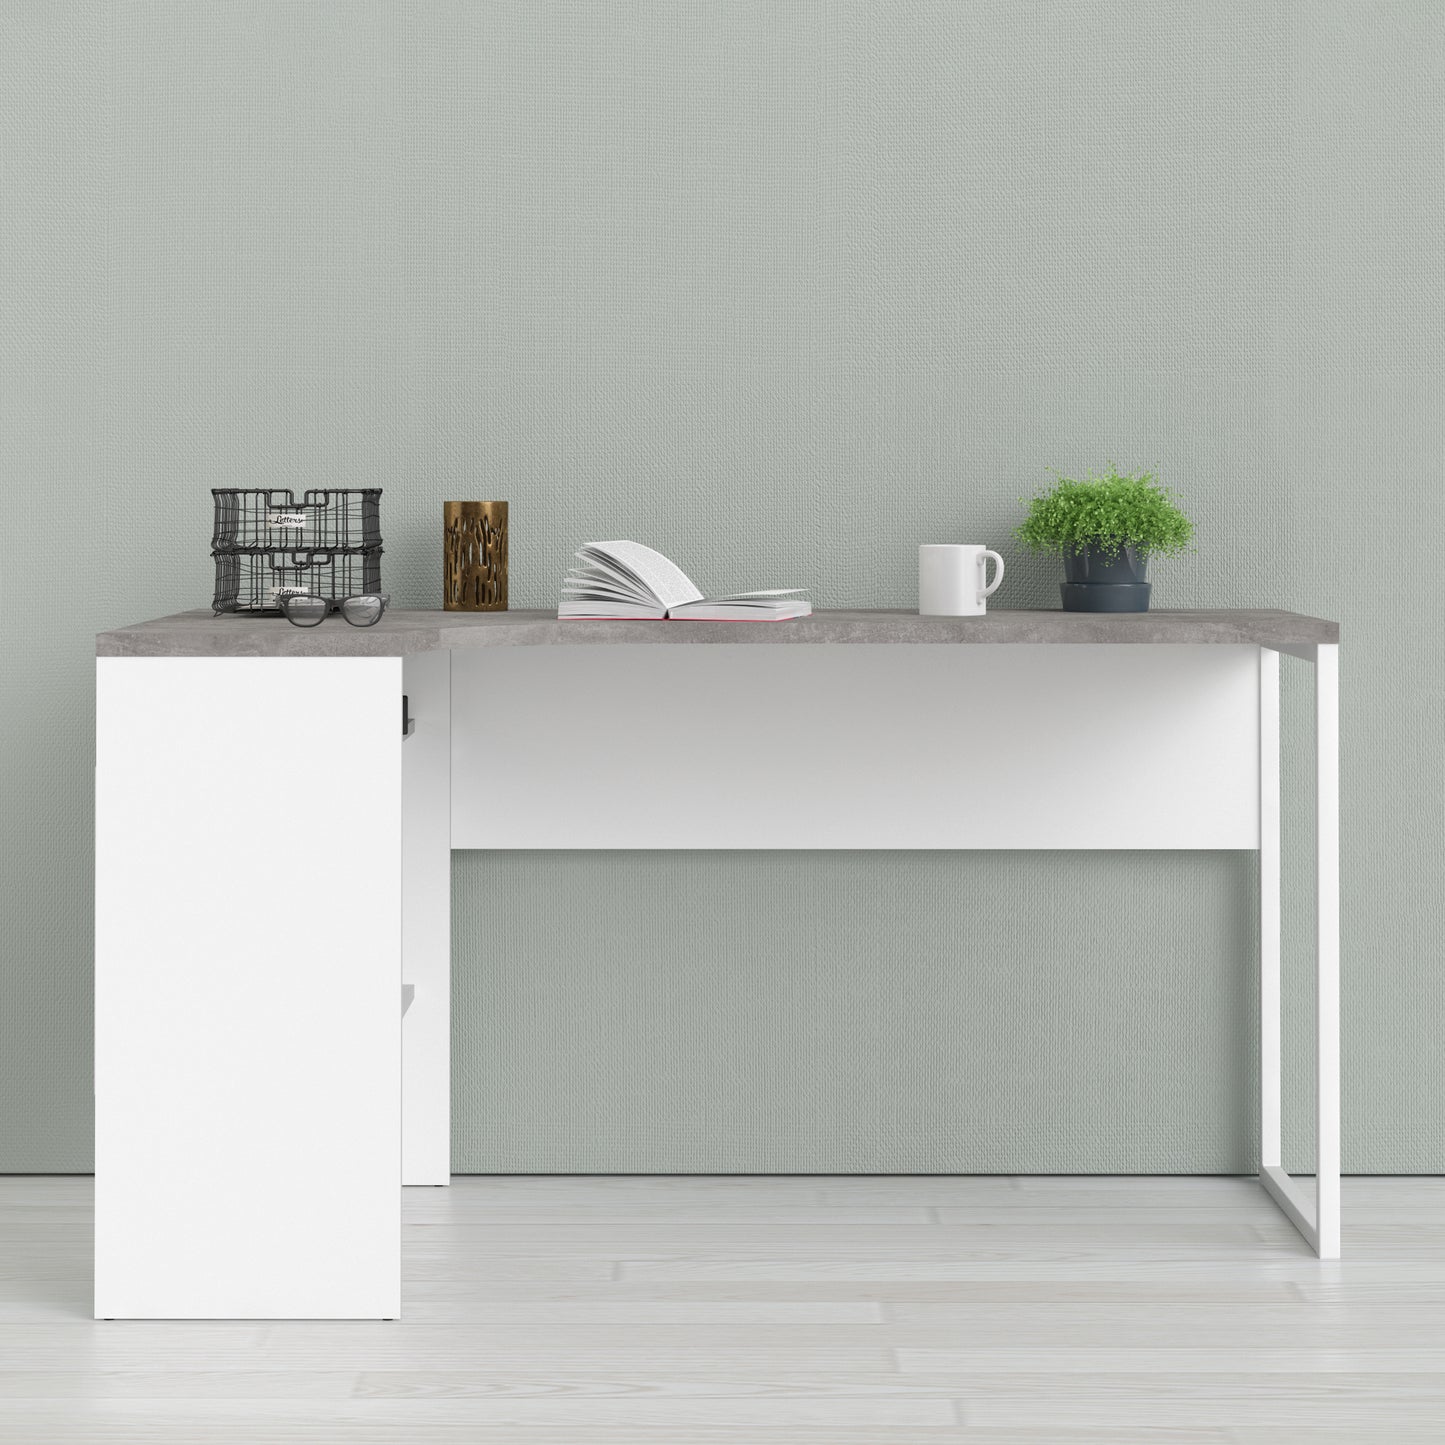 Function Plus  Corner Desk 2 Drawers in White and Grey